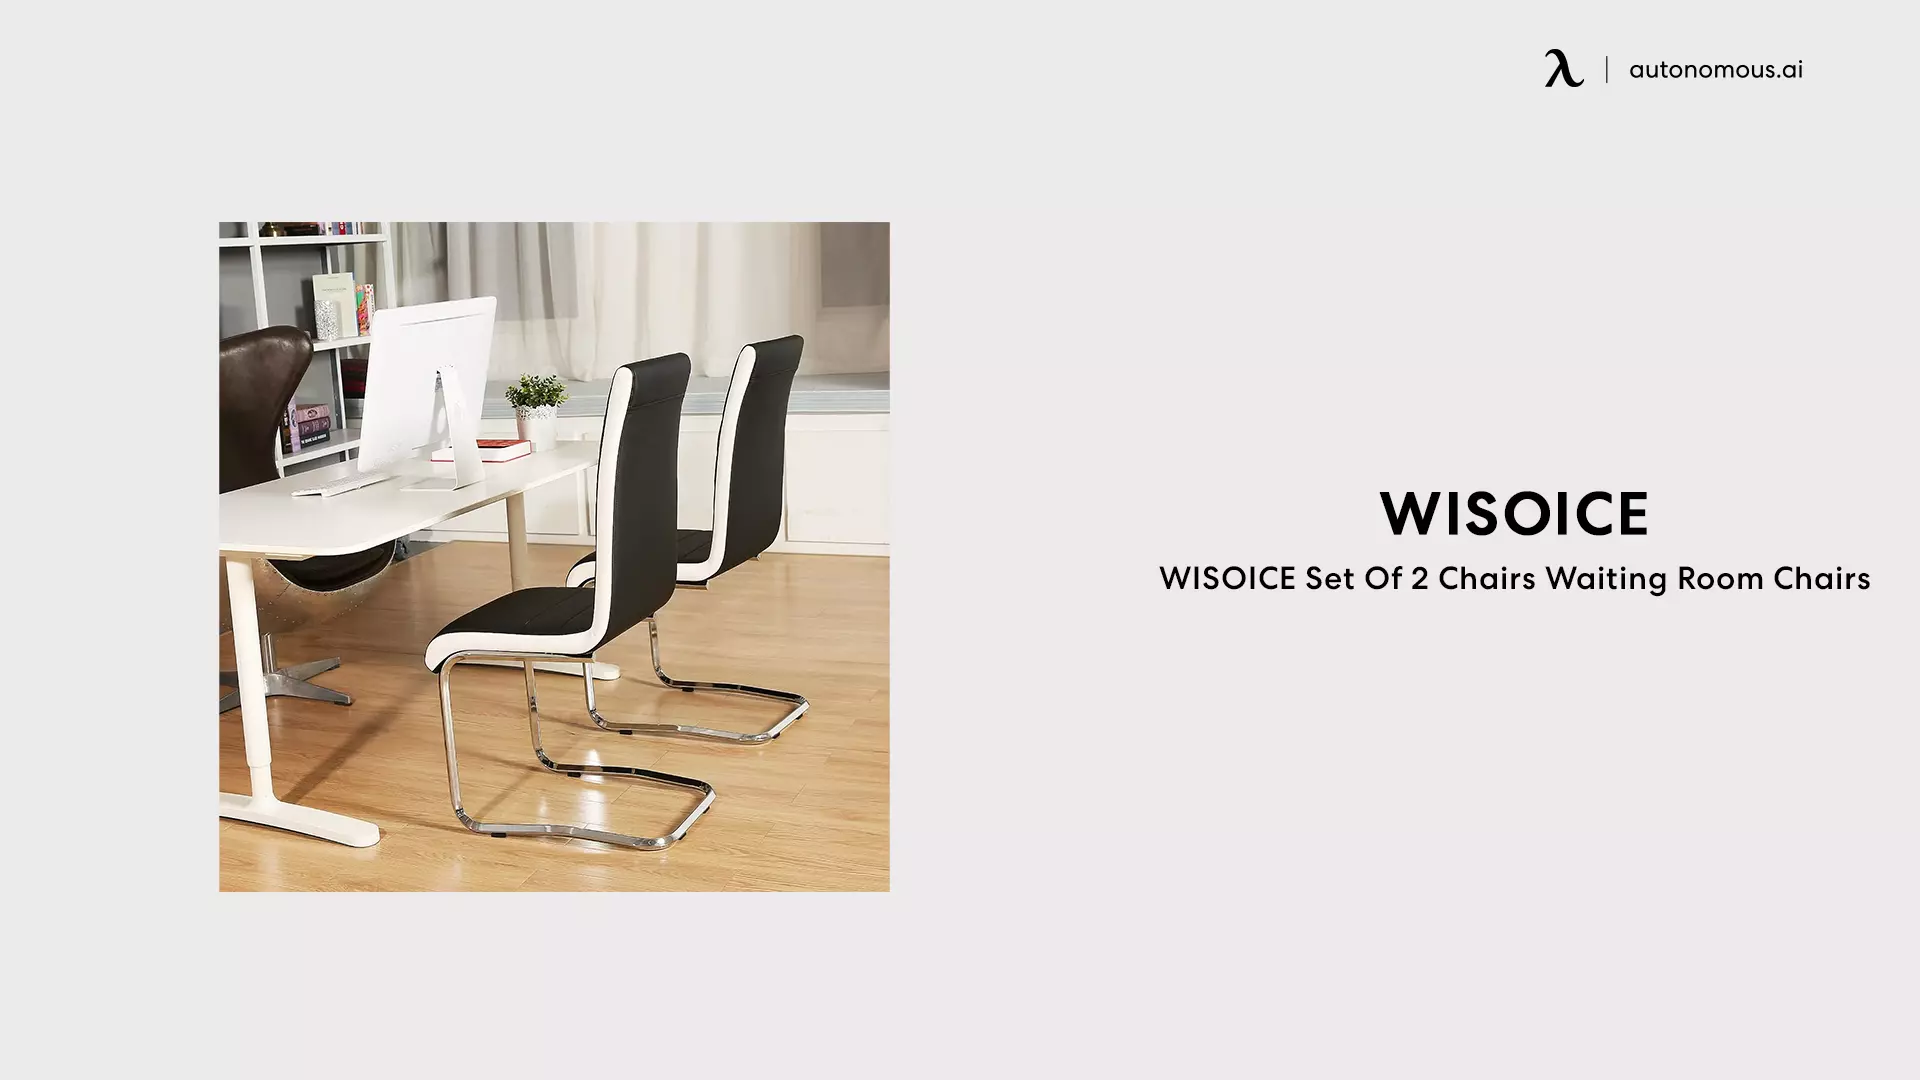 WISOICE Set Of 2 Chairs Waiting Room Chairs